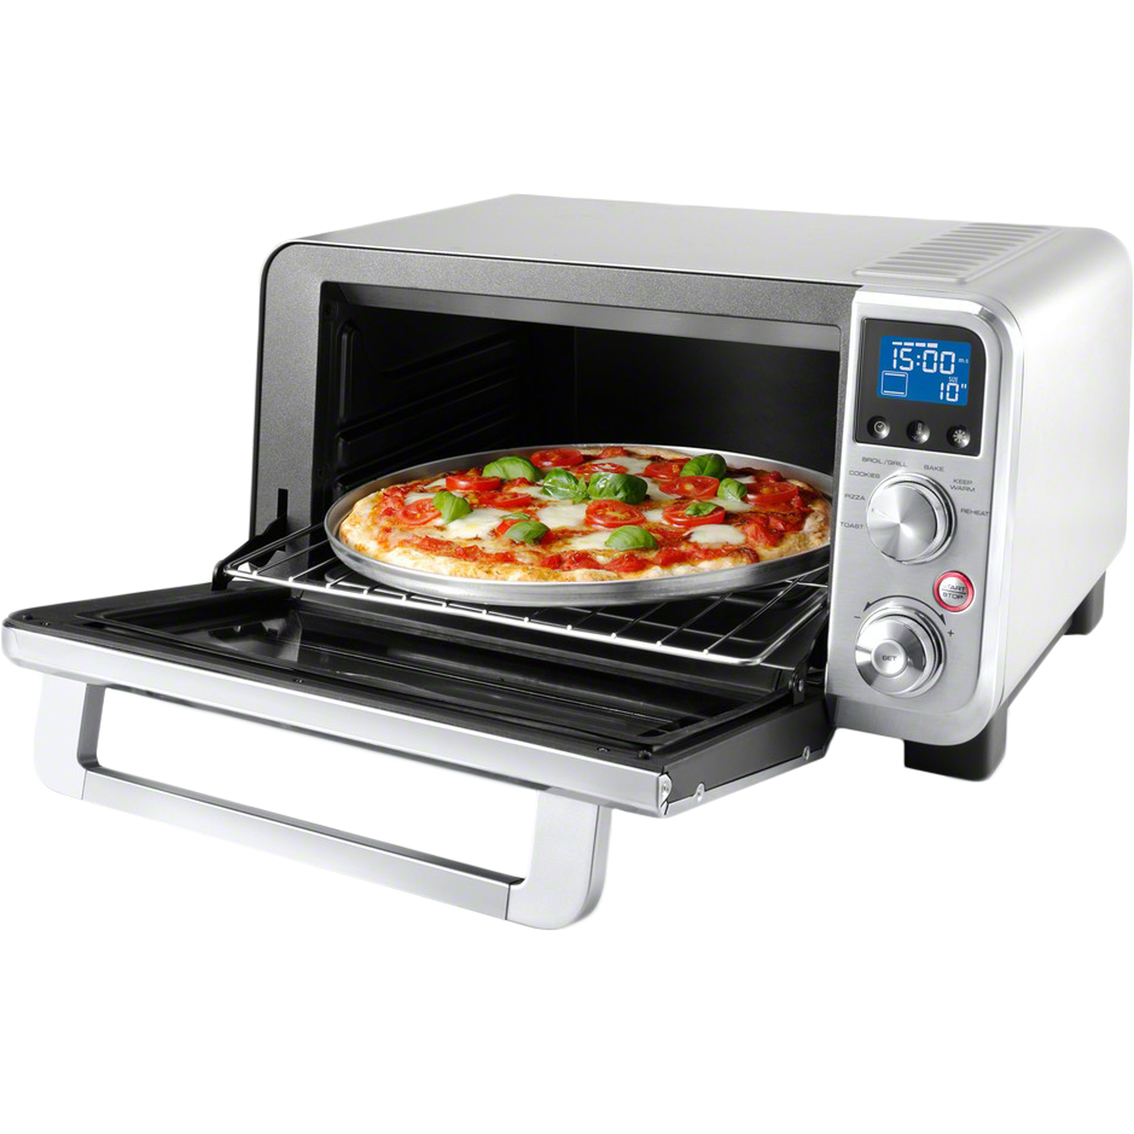 Delonghi Livenza Stainless Digital Toaster Oven Toasters Ovens